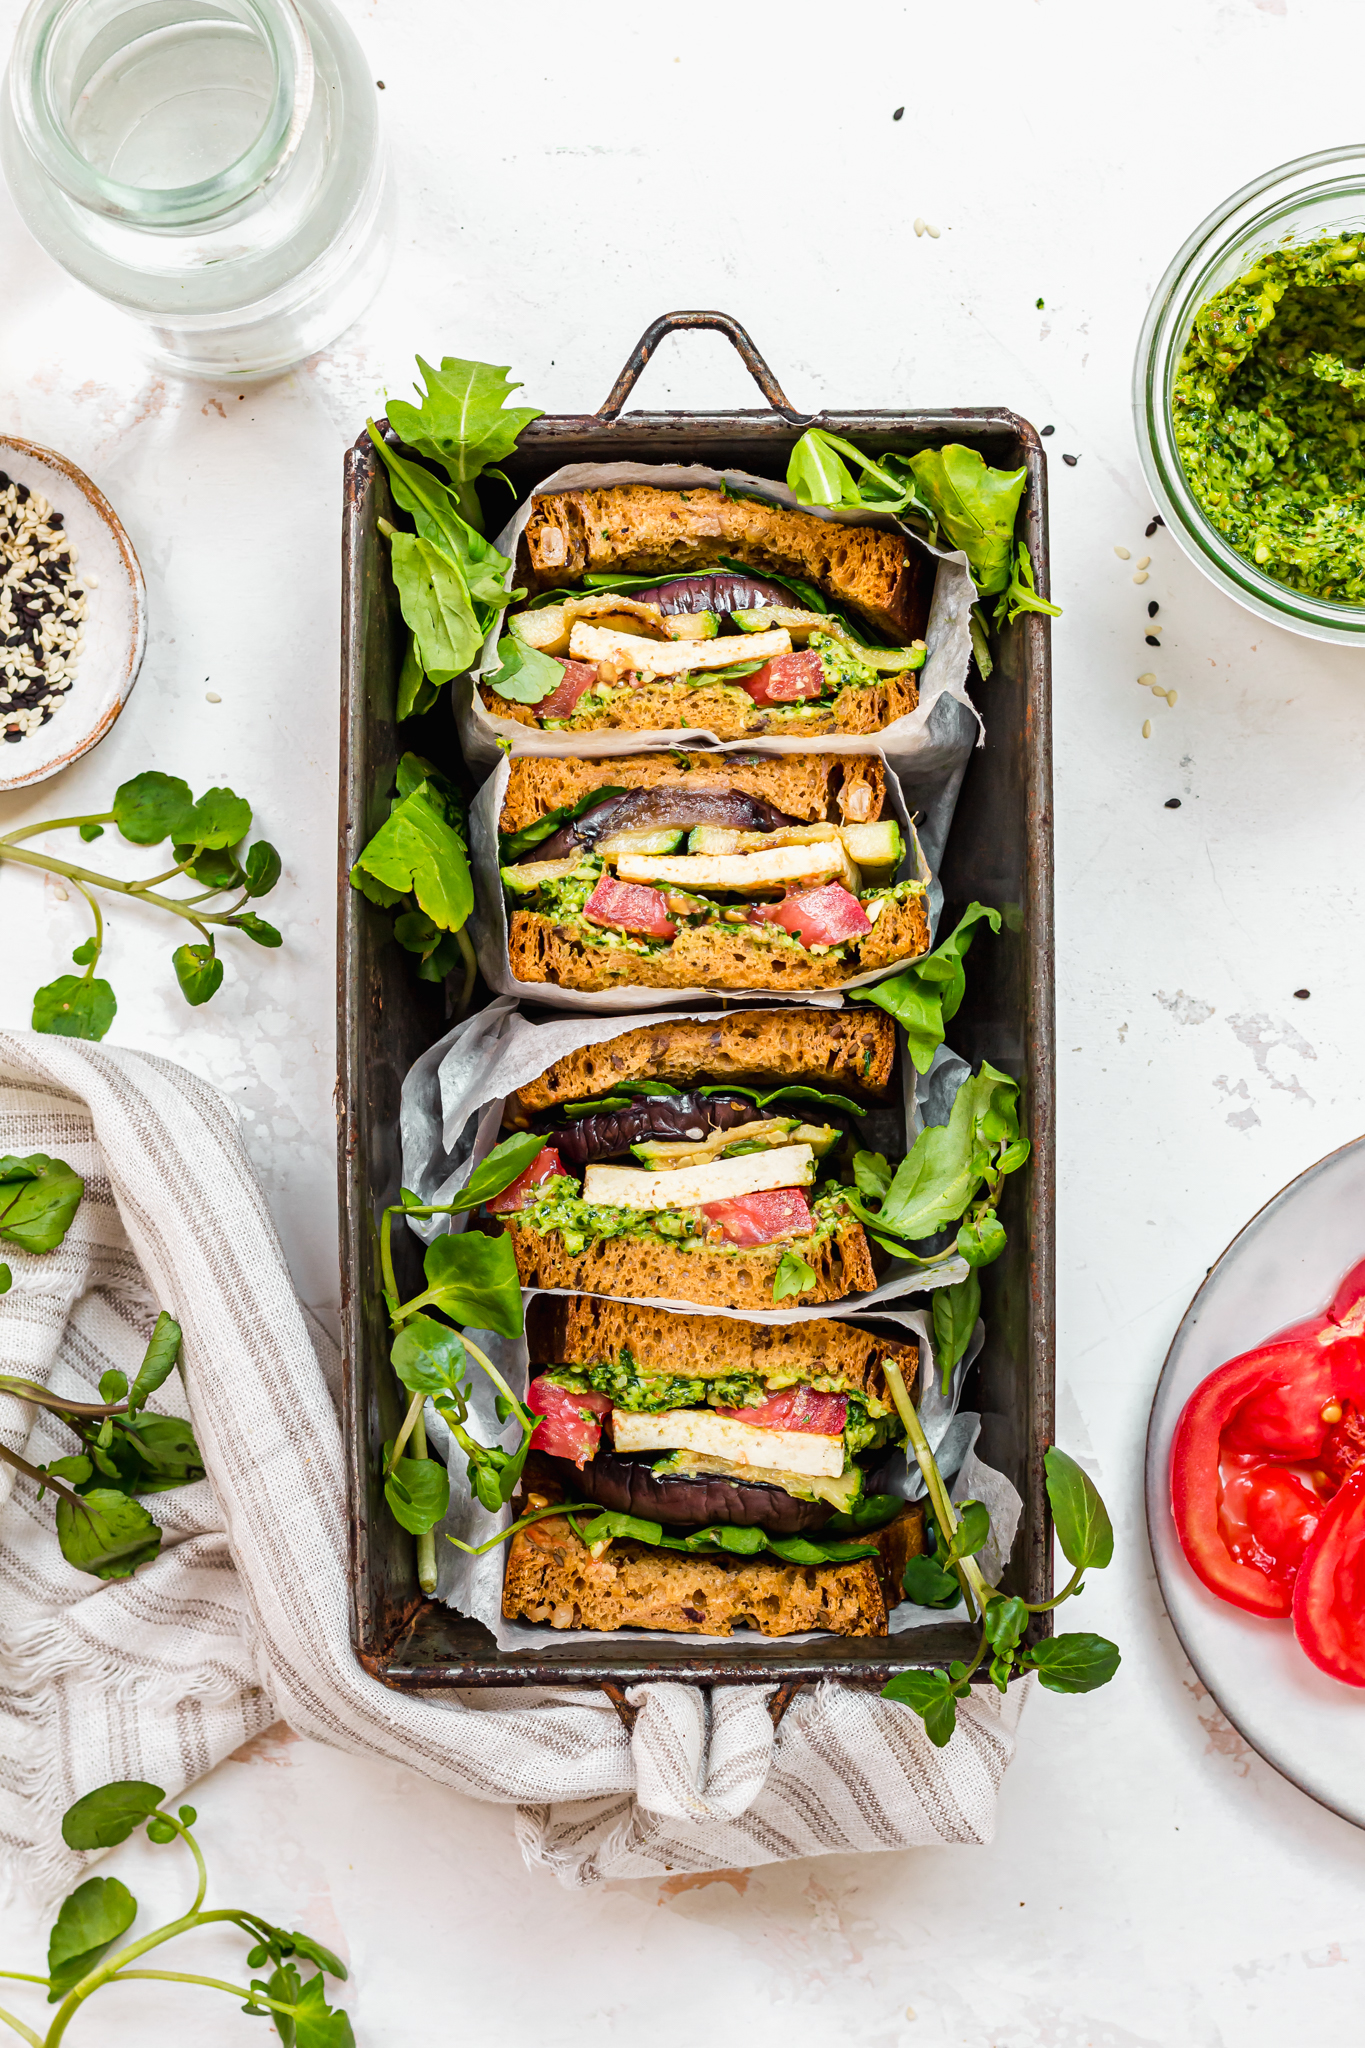 Grilled Vegetable, Tofu and Kale Pesto Sandwich